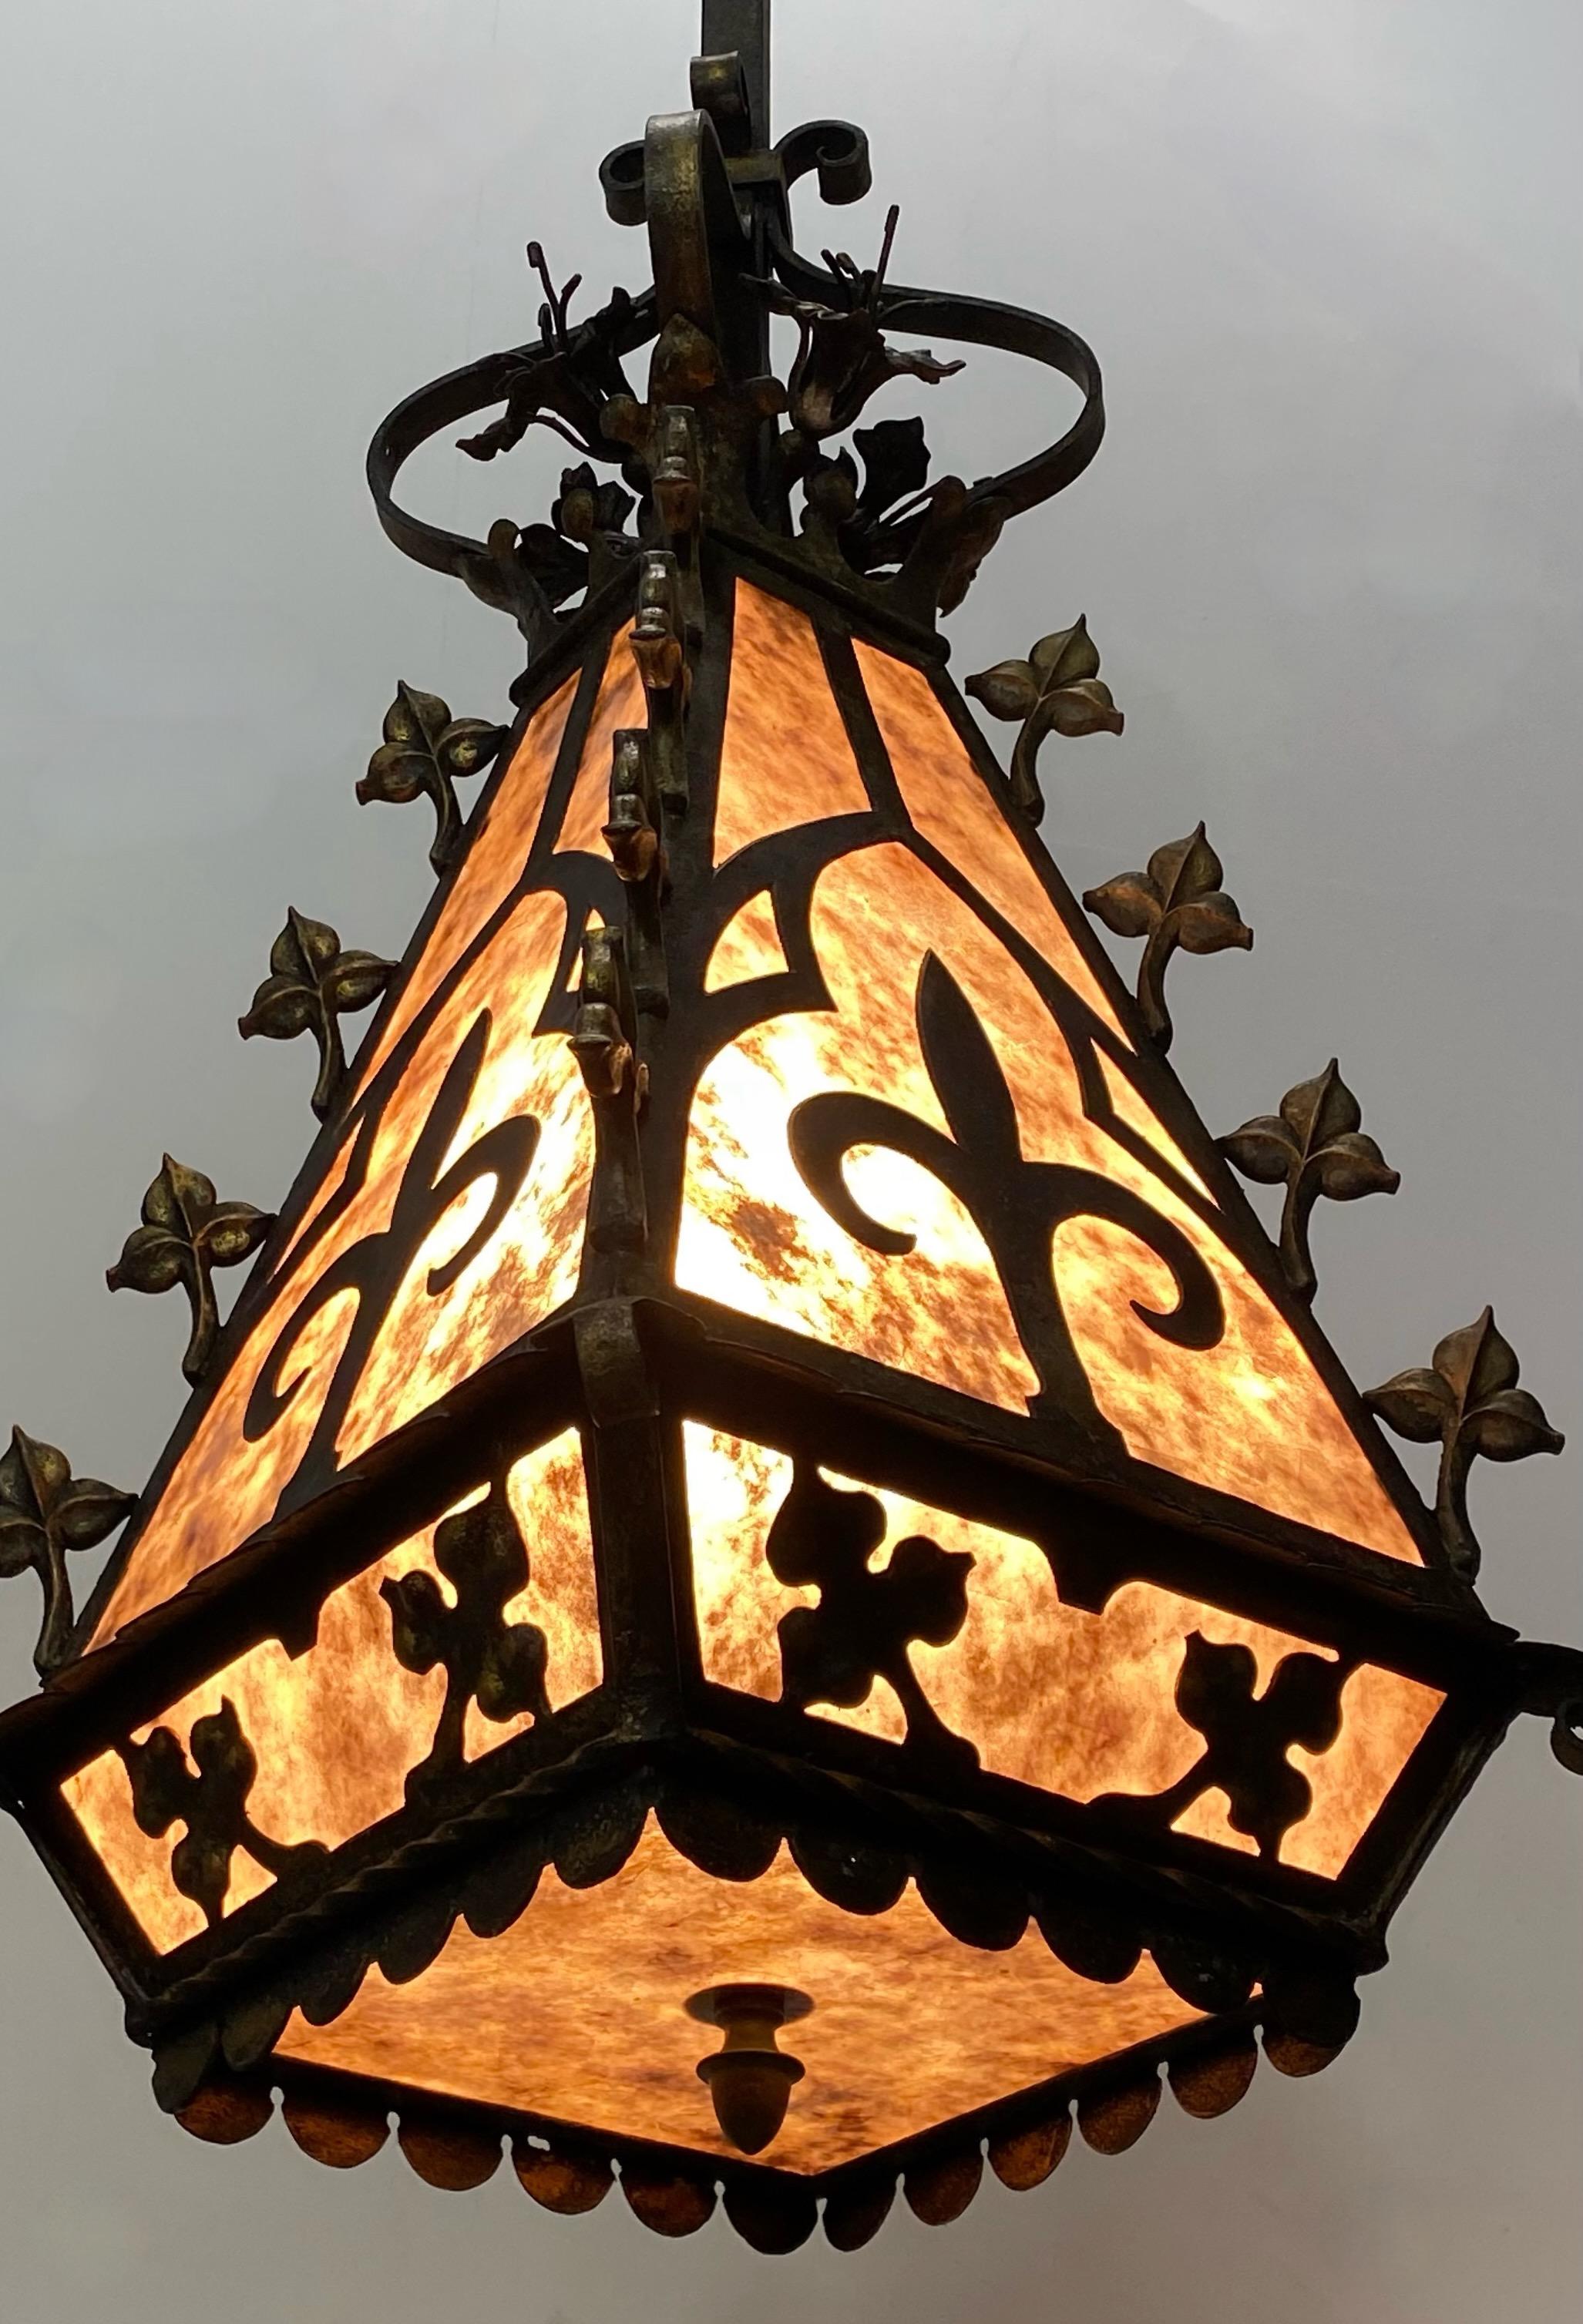 A large wrought iron hanging church lantern with cast zinc leaf ornaments and mica panels.
France, 19th Century
Recently re-wired and fully restored. For indoor or outdoor use.
The drop length with the chain is 8 feet x 9 inches. We can shorten